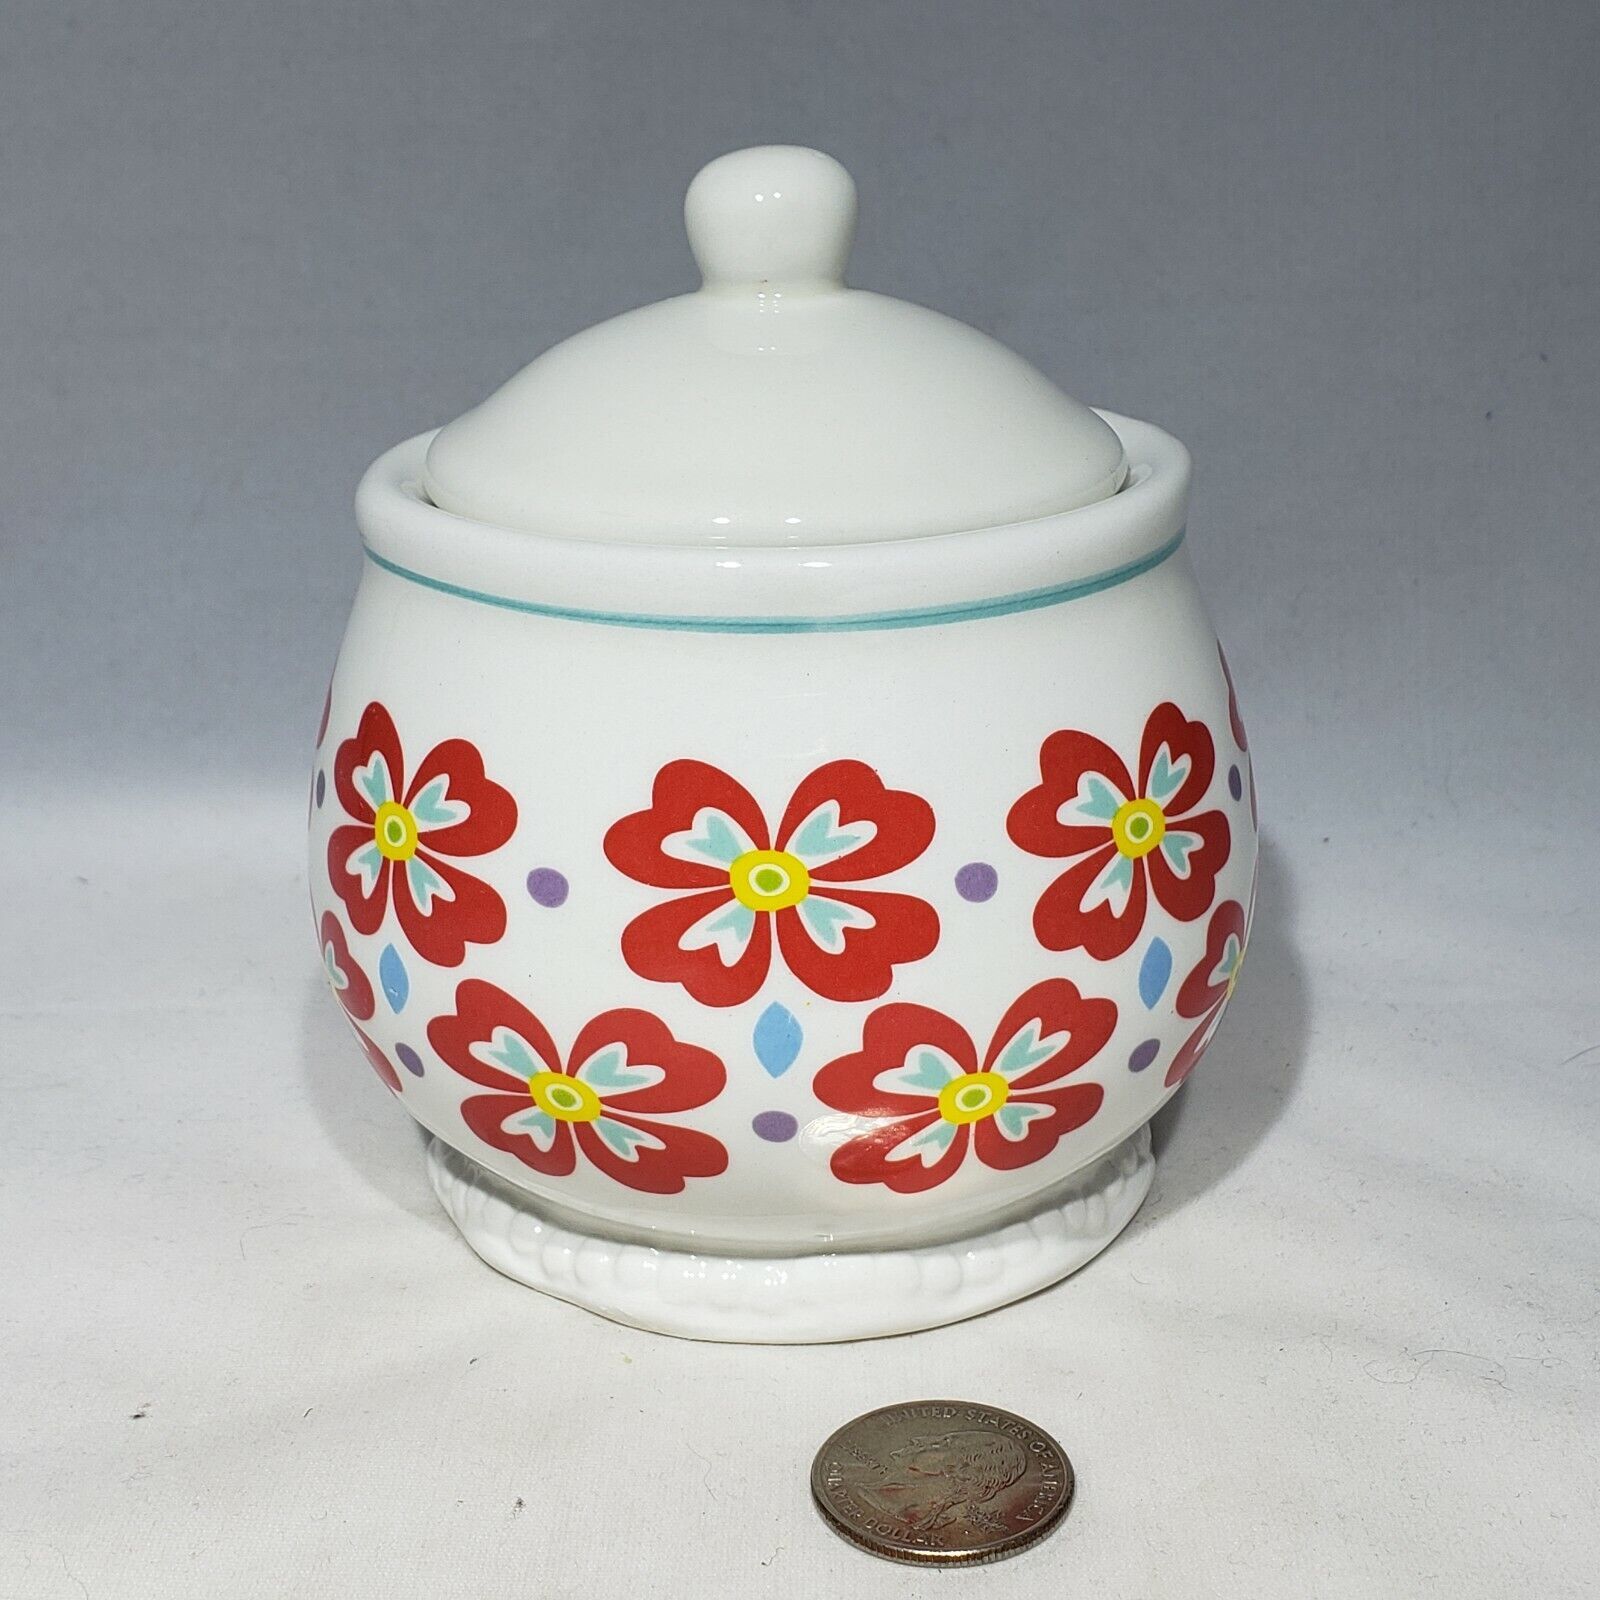 Primary image for The Pioneer Woman Flea Market Floral Red Daisy Lidded Sugar Bowl 